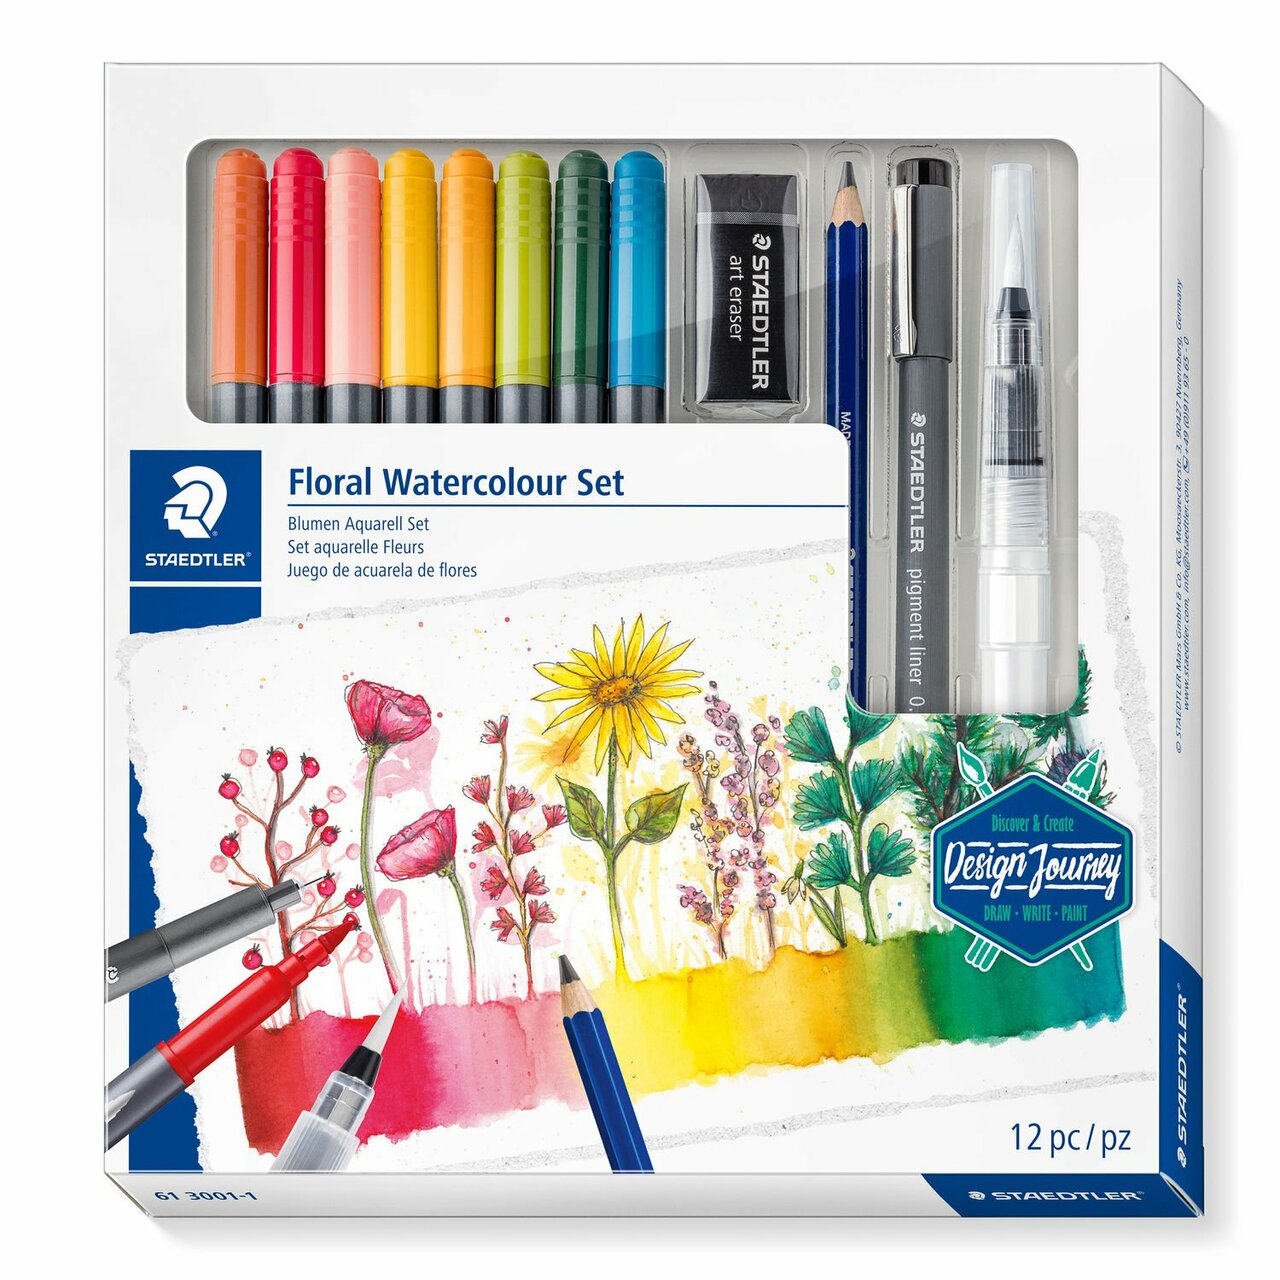  Staedtler Mars Rasor 526 61 Eraser Pencil with Brush (Pack of  12) : Office Products